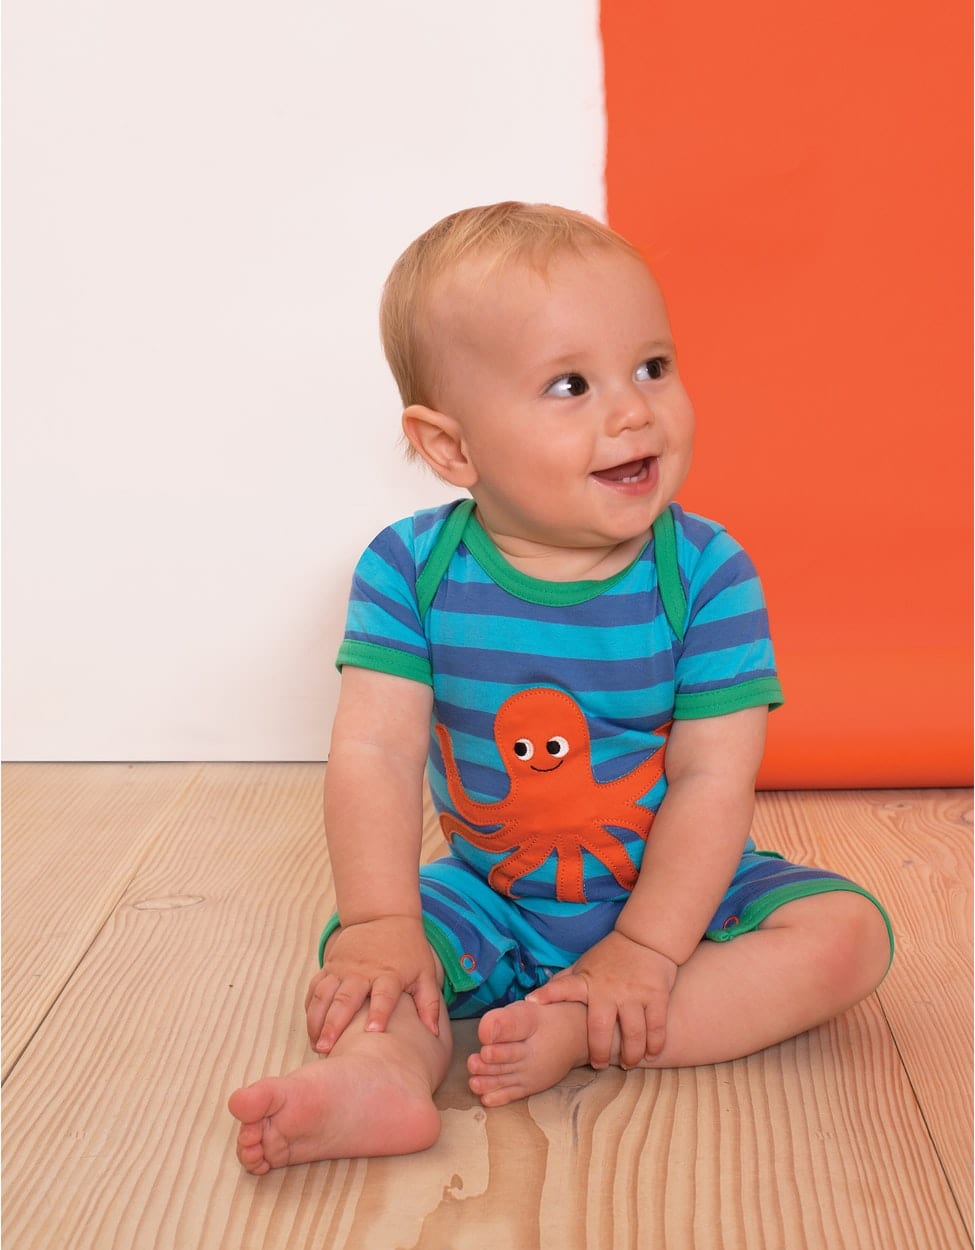 Toby Tiger, Octopus Rompersuit for Boys